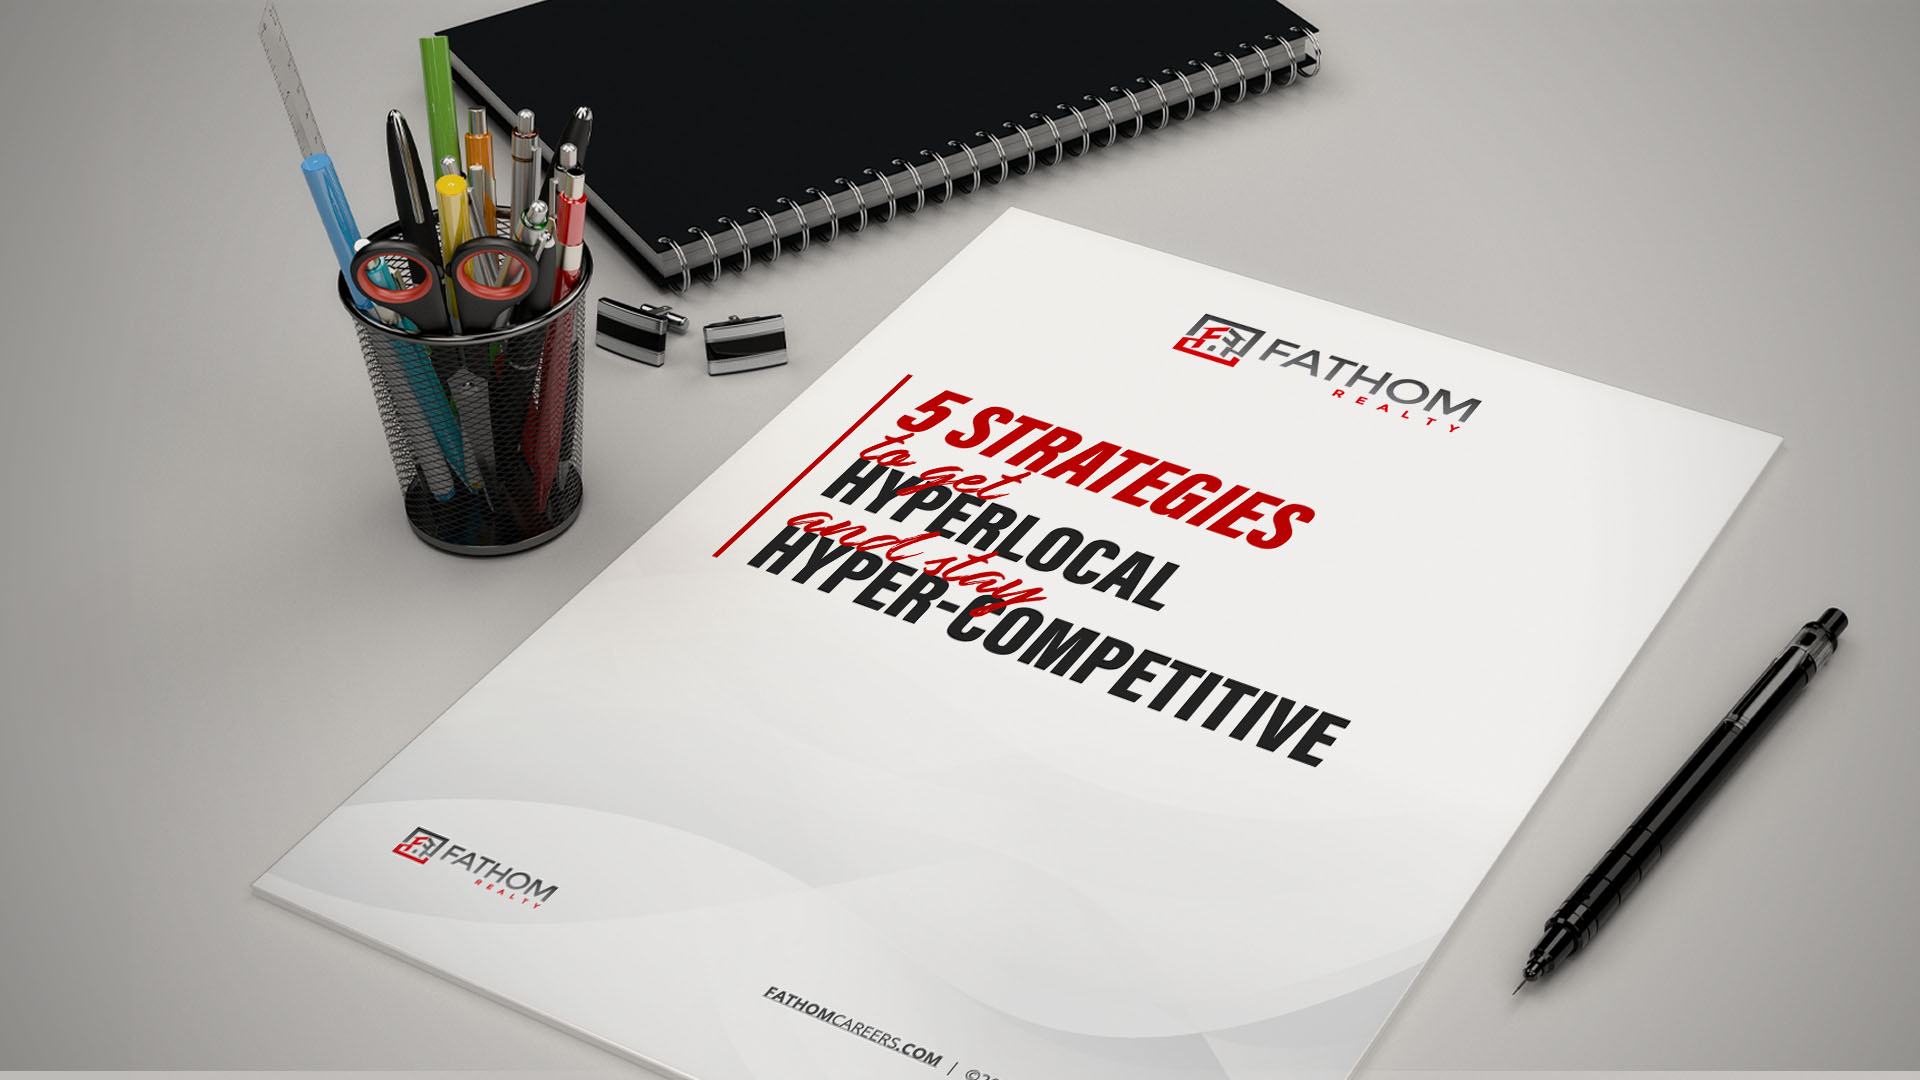 Featured image for “5 Strategies To Get Hyperlocal and Stay Hyper-Competitive”